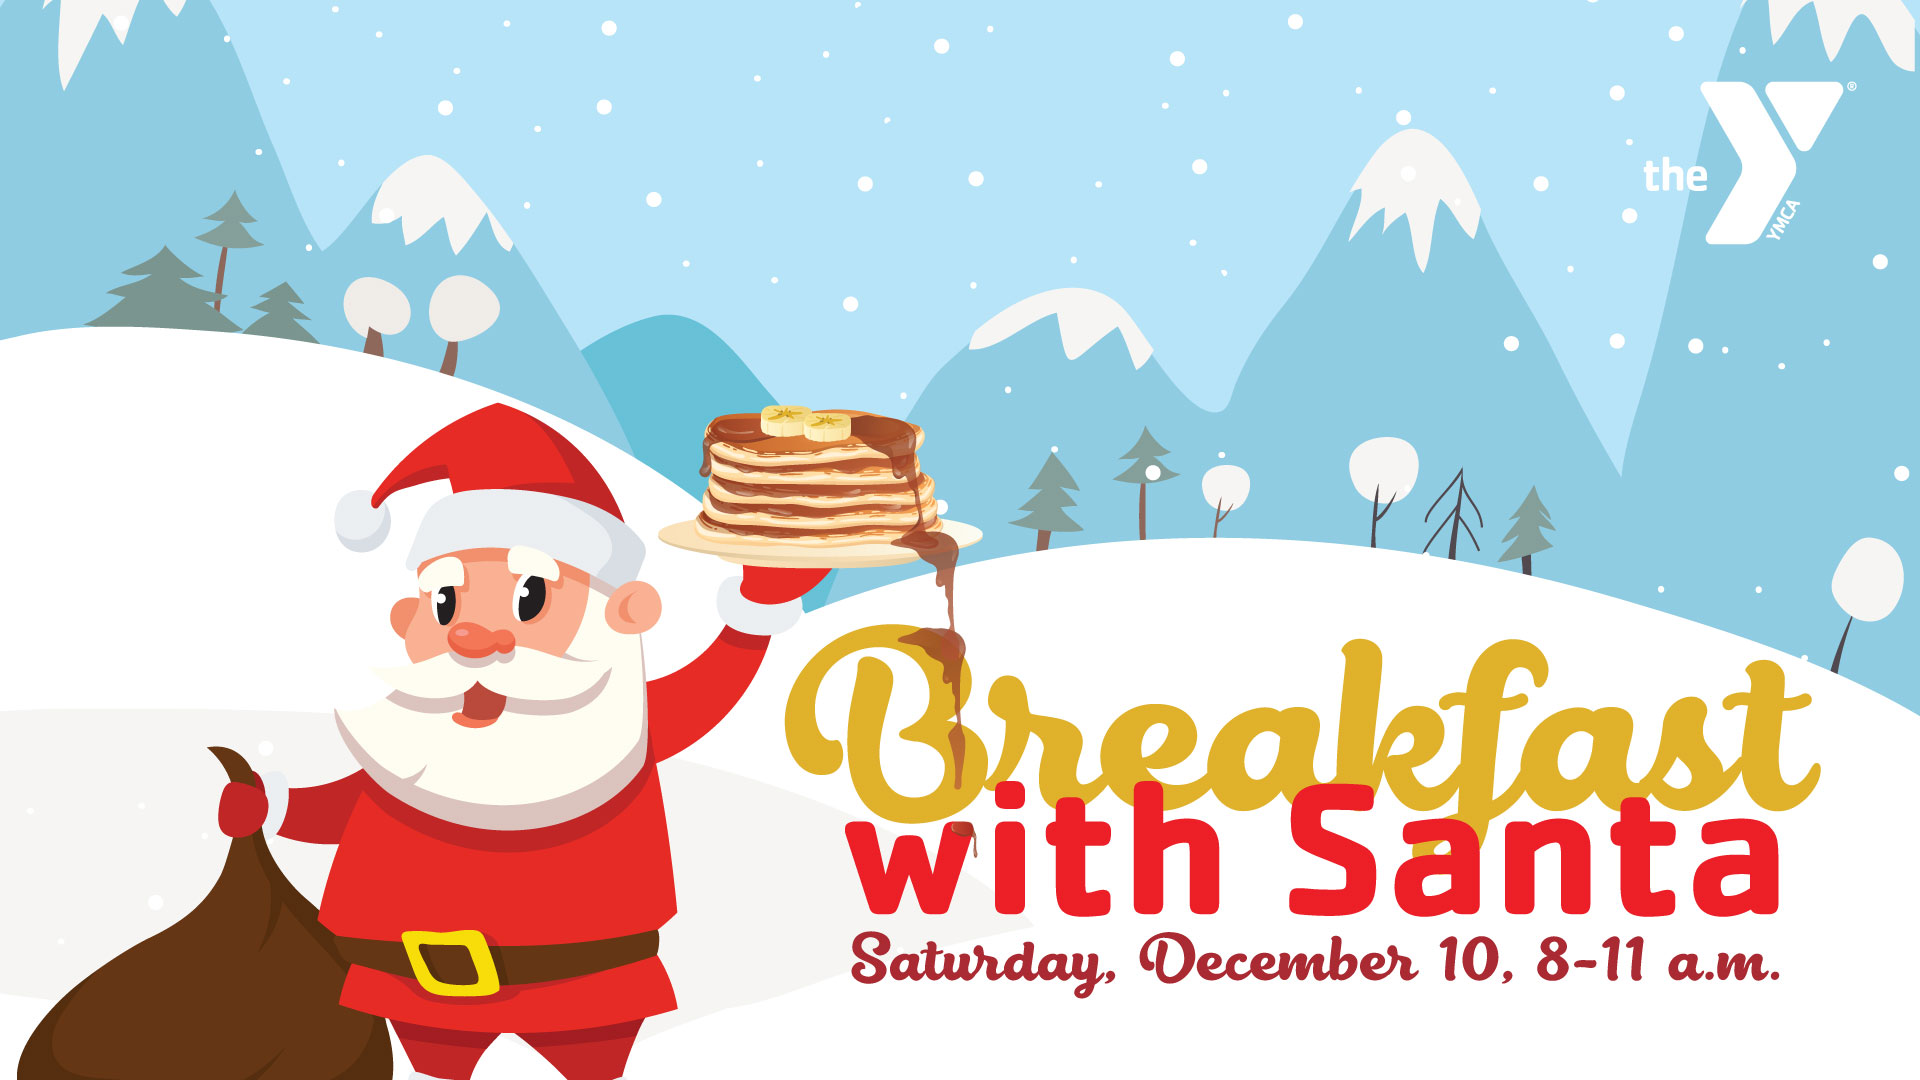 Featured image for “Breakfast with Santa”